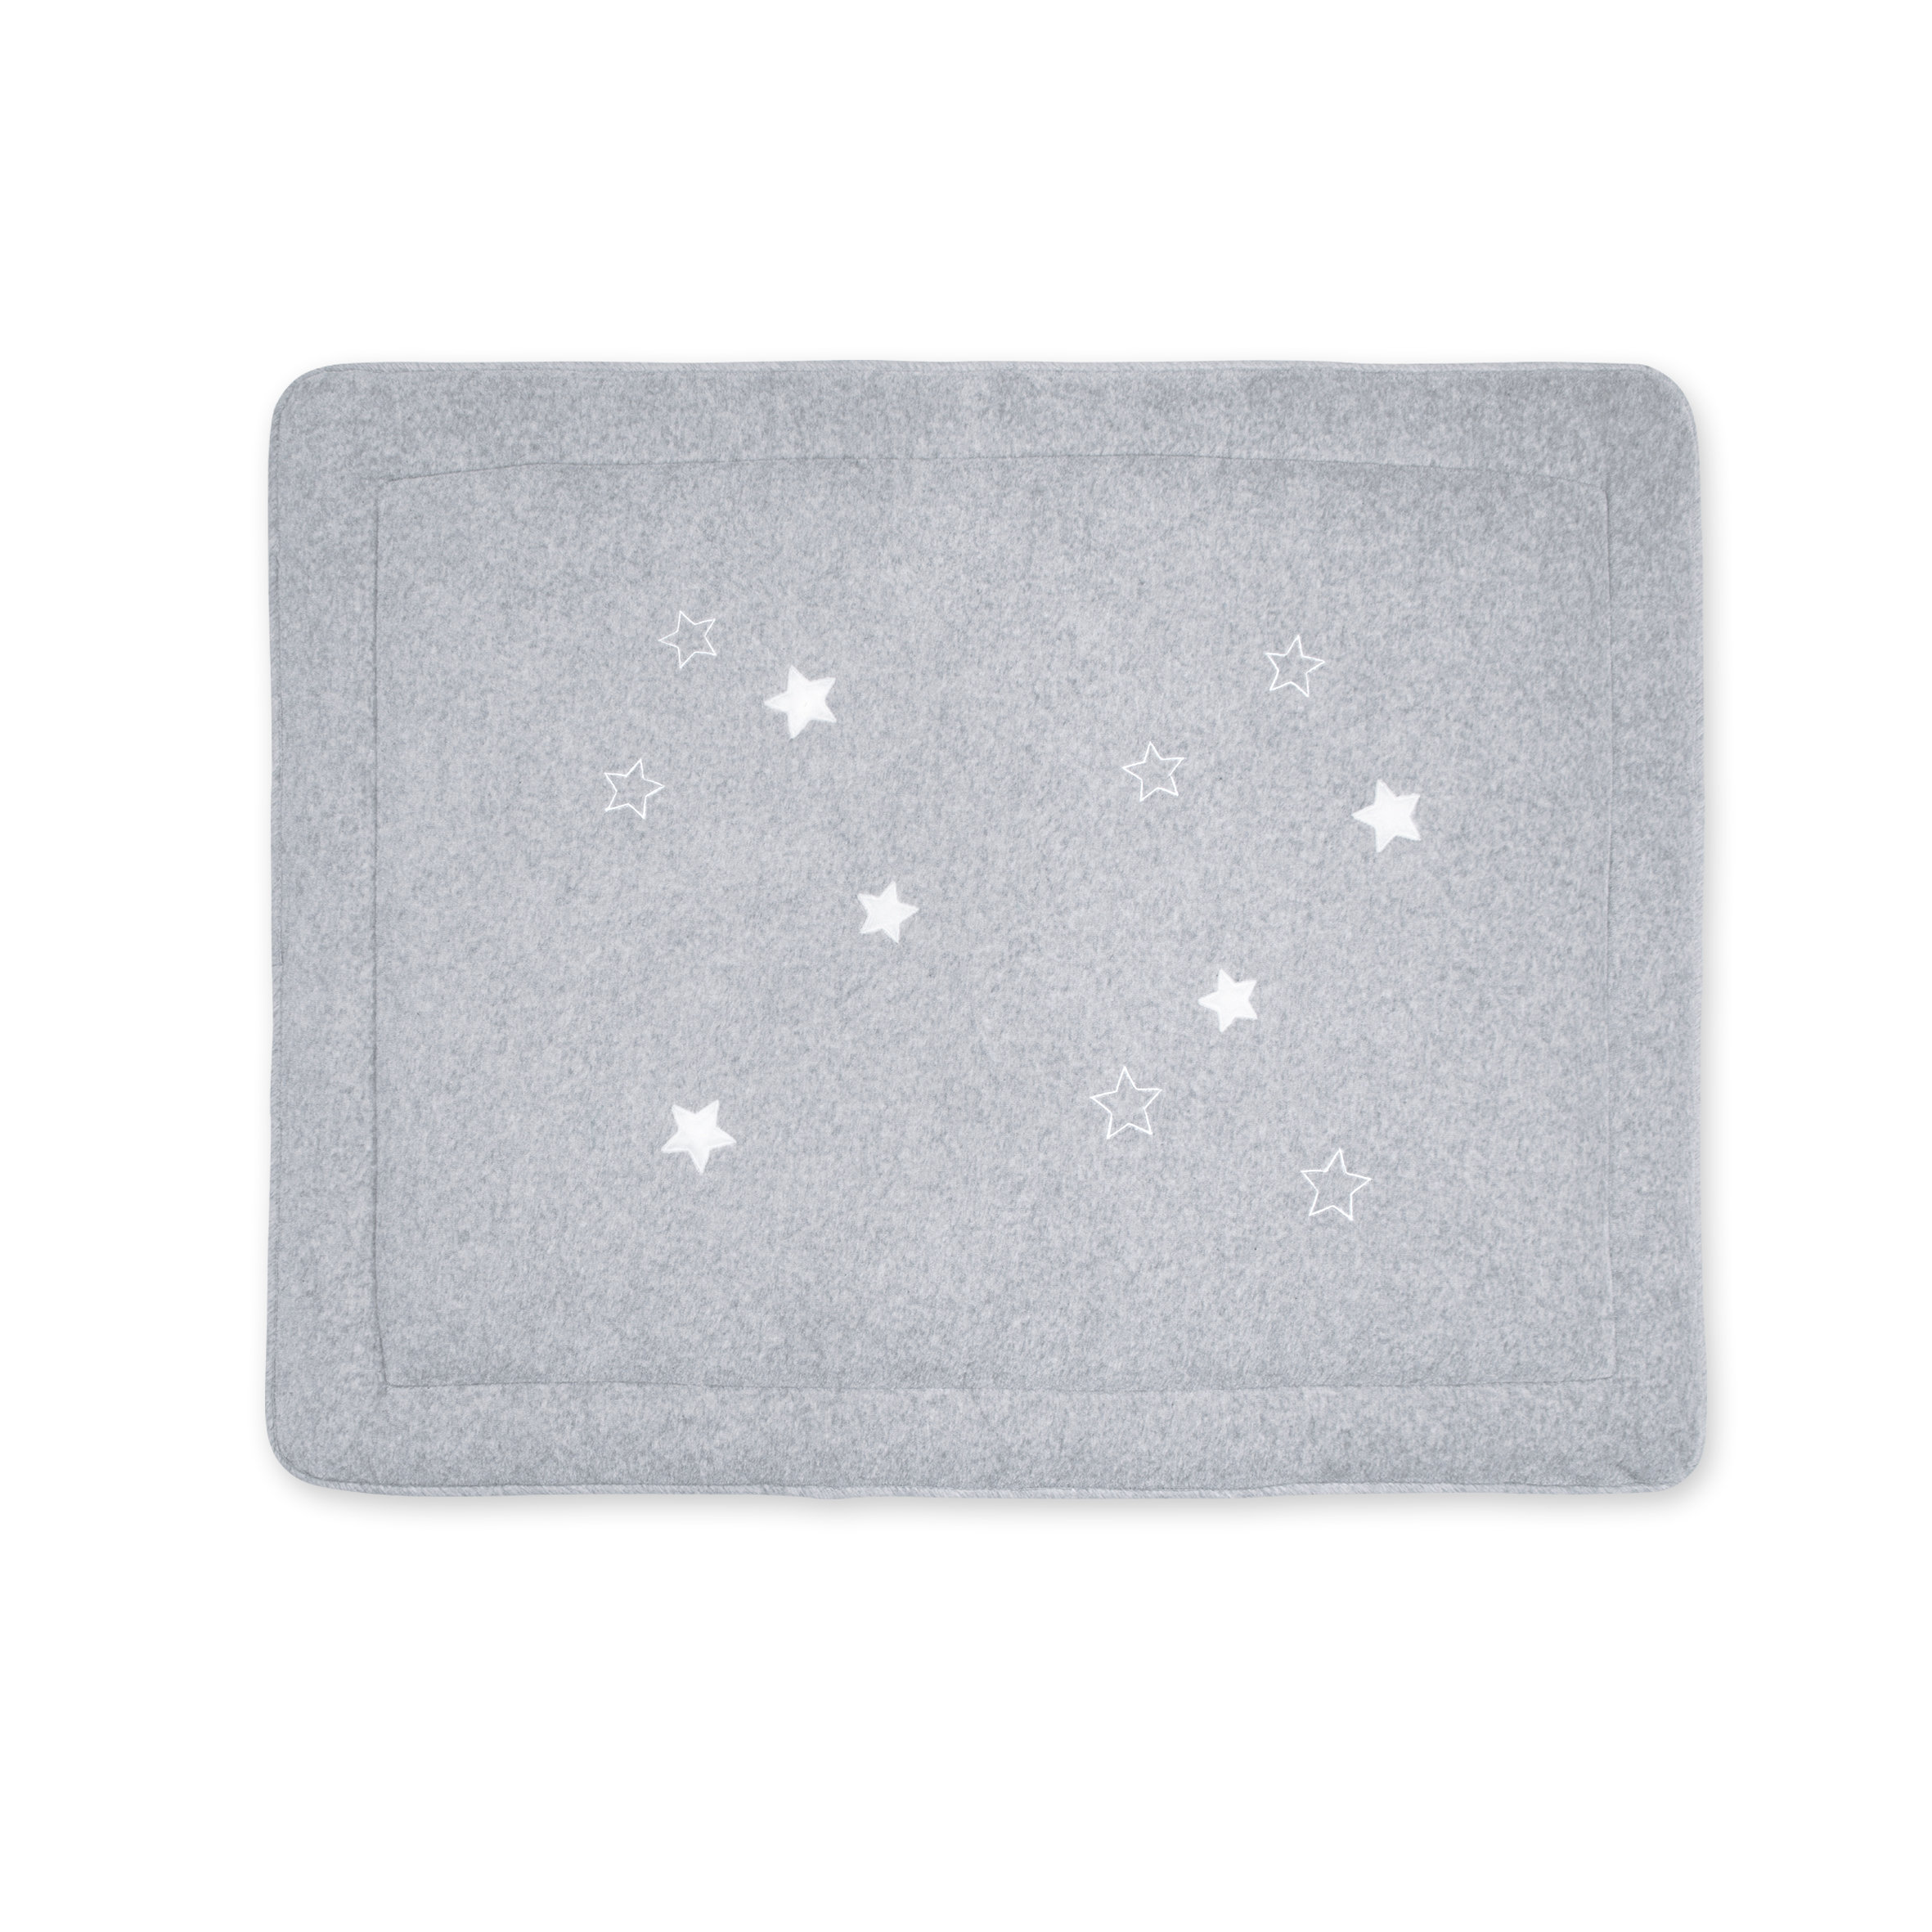 Padded play mat Pady terry + terry 75x95cm STARY Mix grey